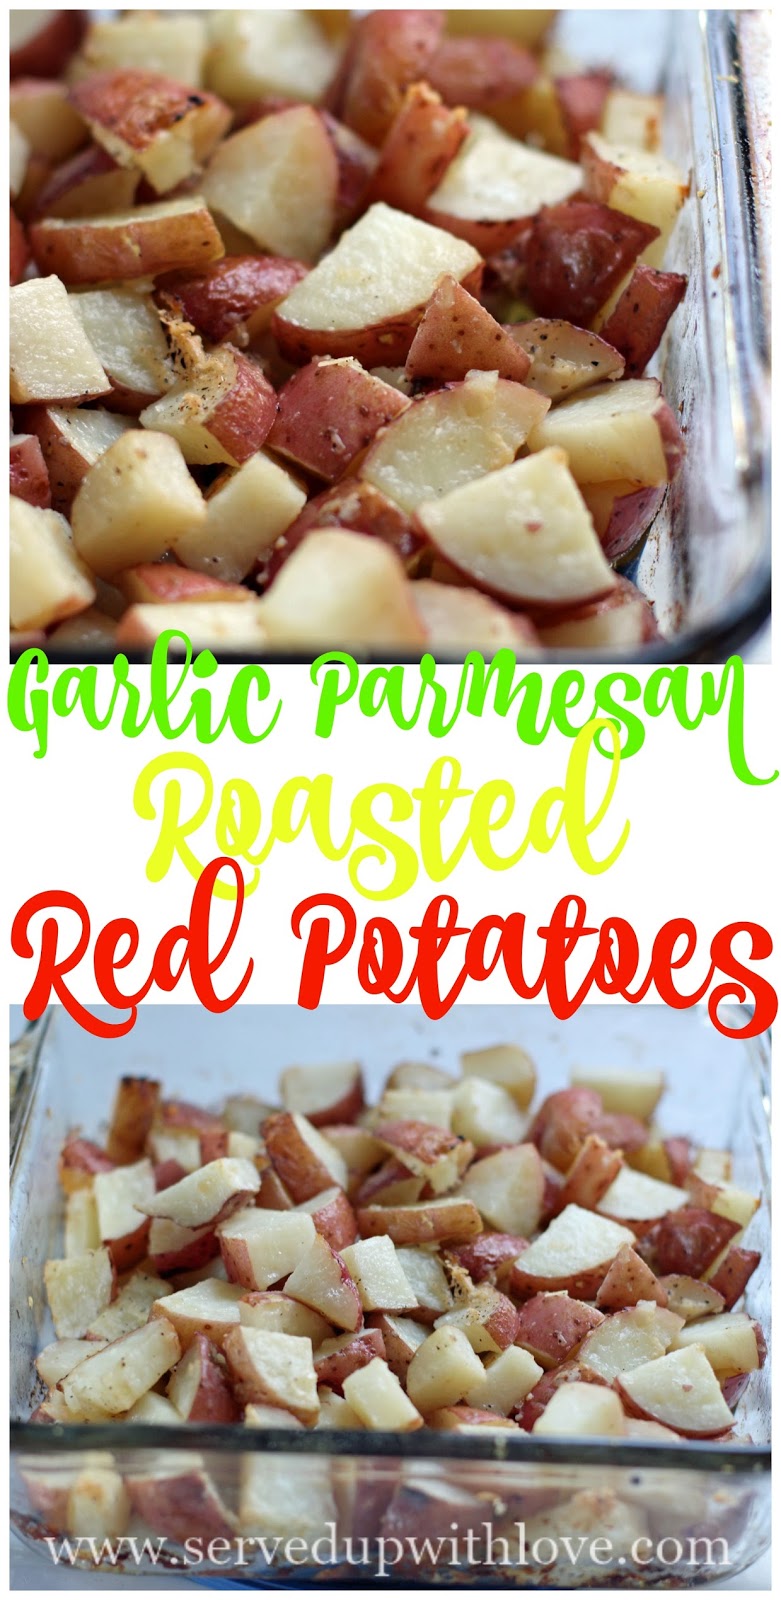 Served Up With Love: Garlic Parmesan Roasted Red Potatoes